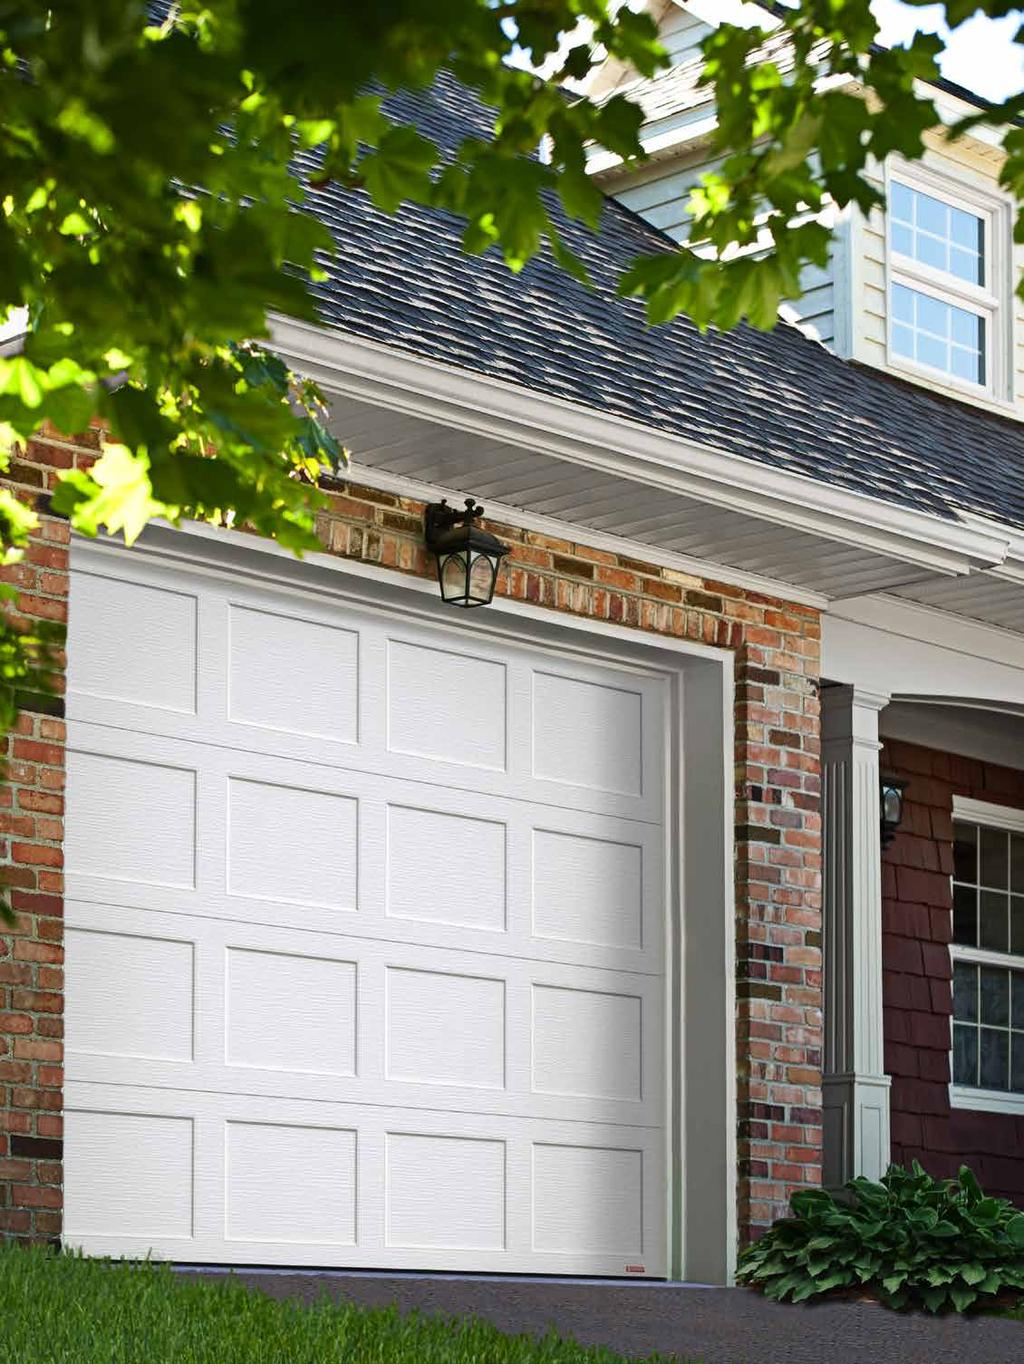 WHY HAVE MORE THAN 1.7 MILLION GARAGA DOORS BEEN INSTALLED SINCE 1983?